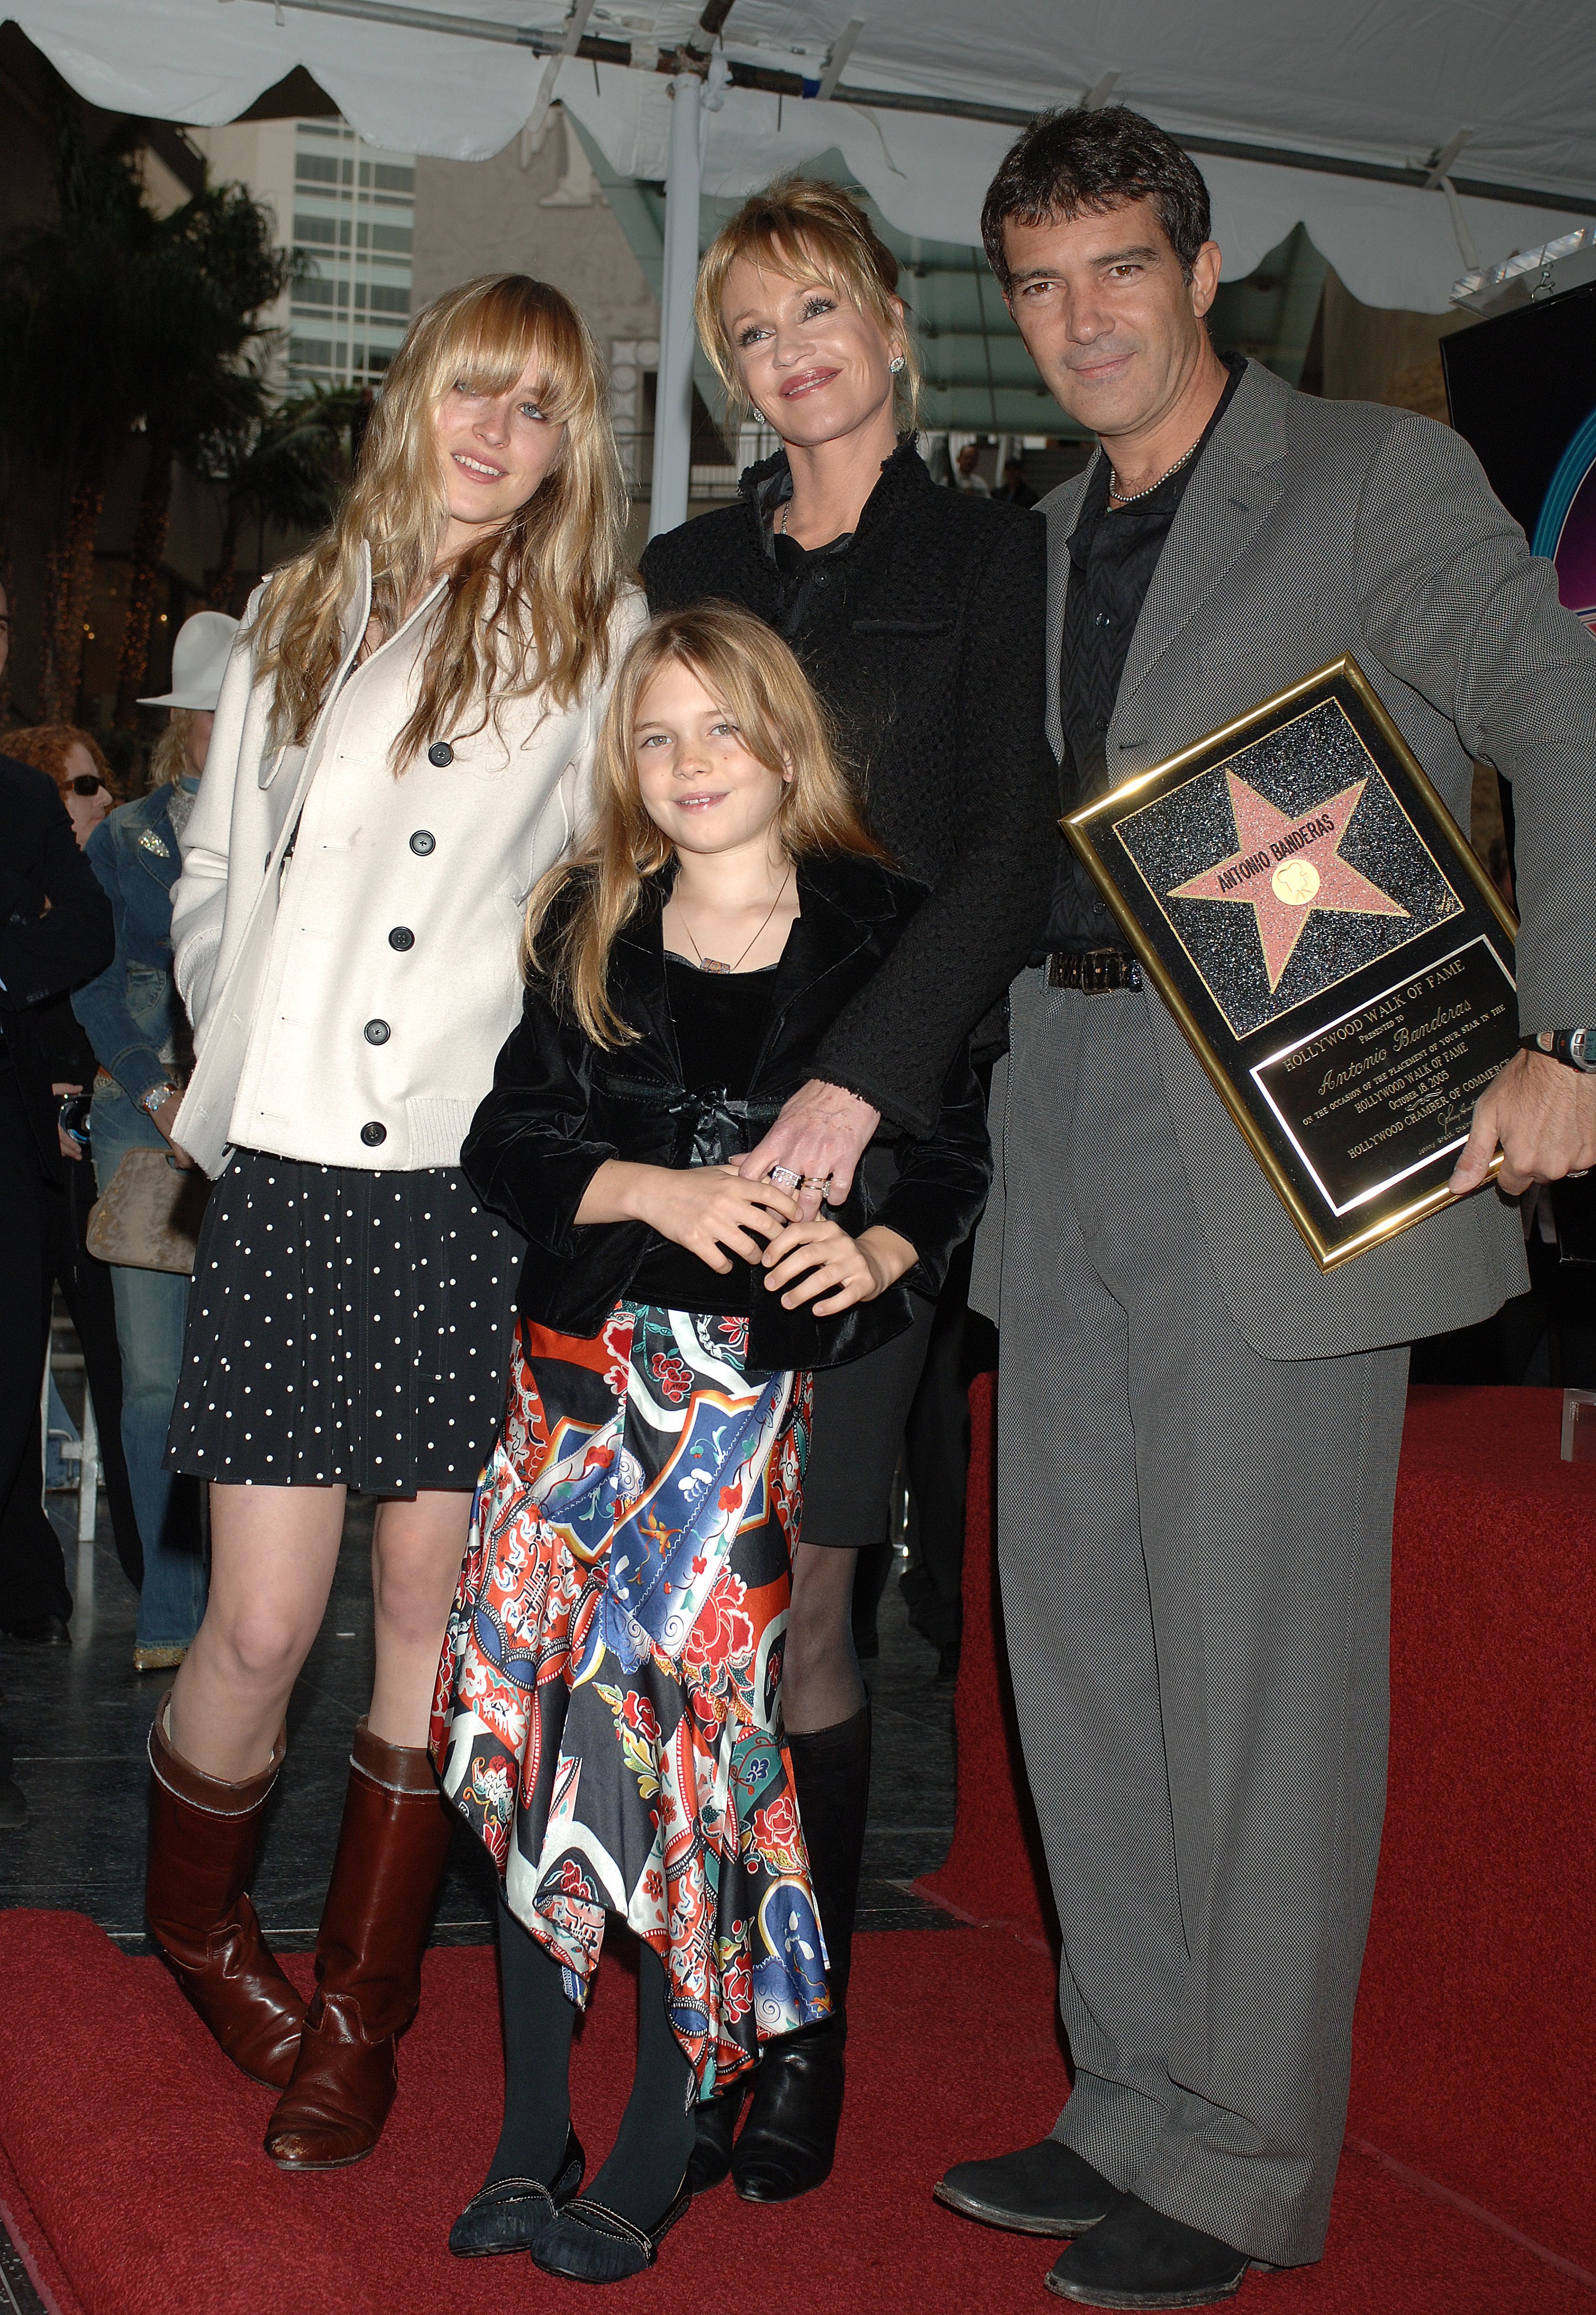 Antonio Banderas and Melanie Griffith with their daughters Stella Banderas and Dakota Johnson at his star ceremony on the Hollywood Walk of Fame on October 18, 2005 ┃Source: Getty Images